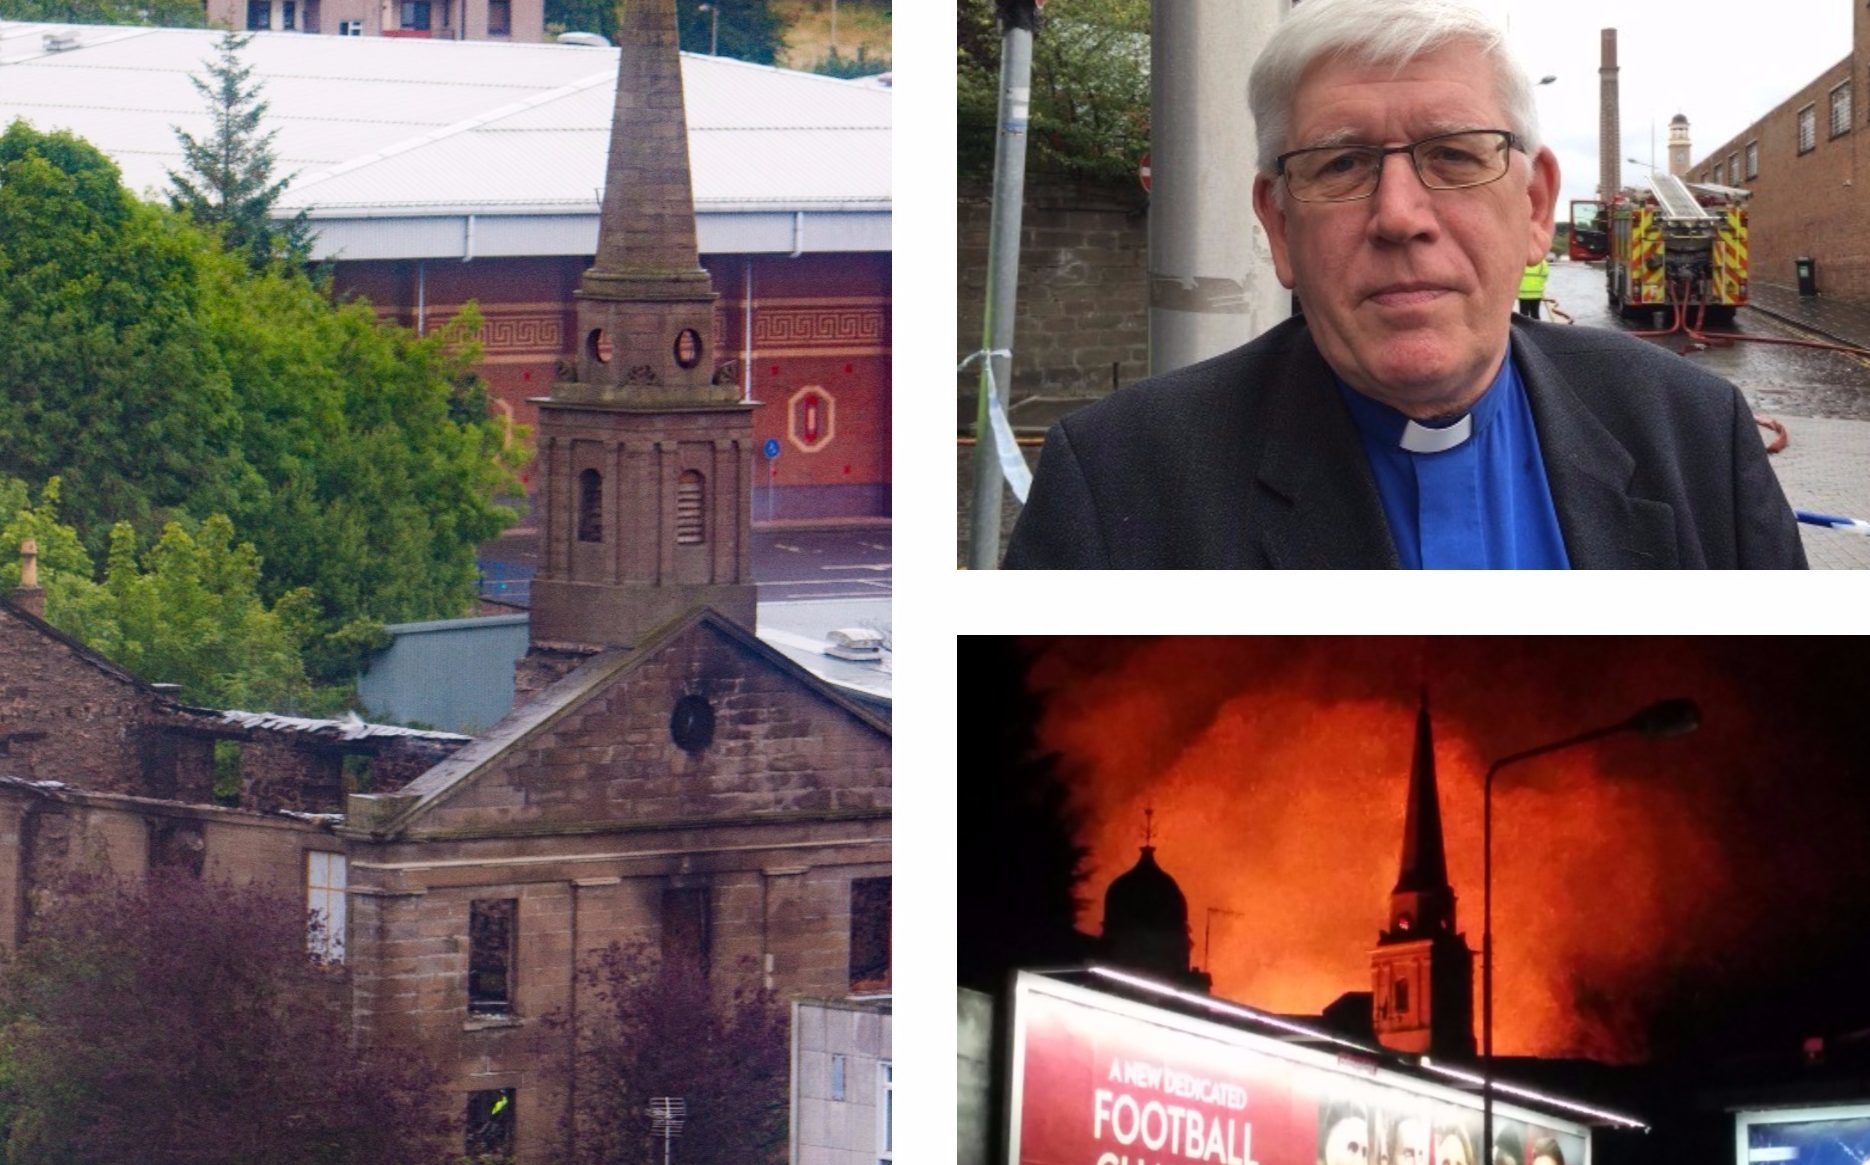 Reverend Willie Strachan (pictured) is calling for memories of the Lochee church to be cherished.